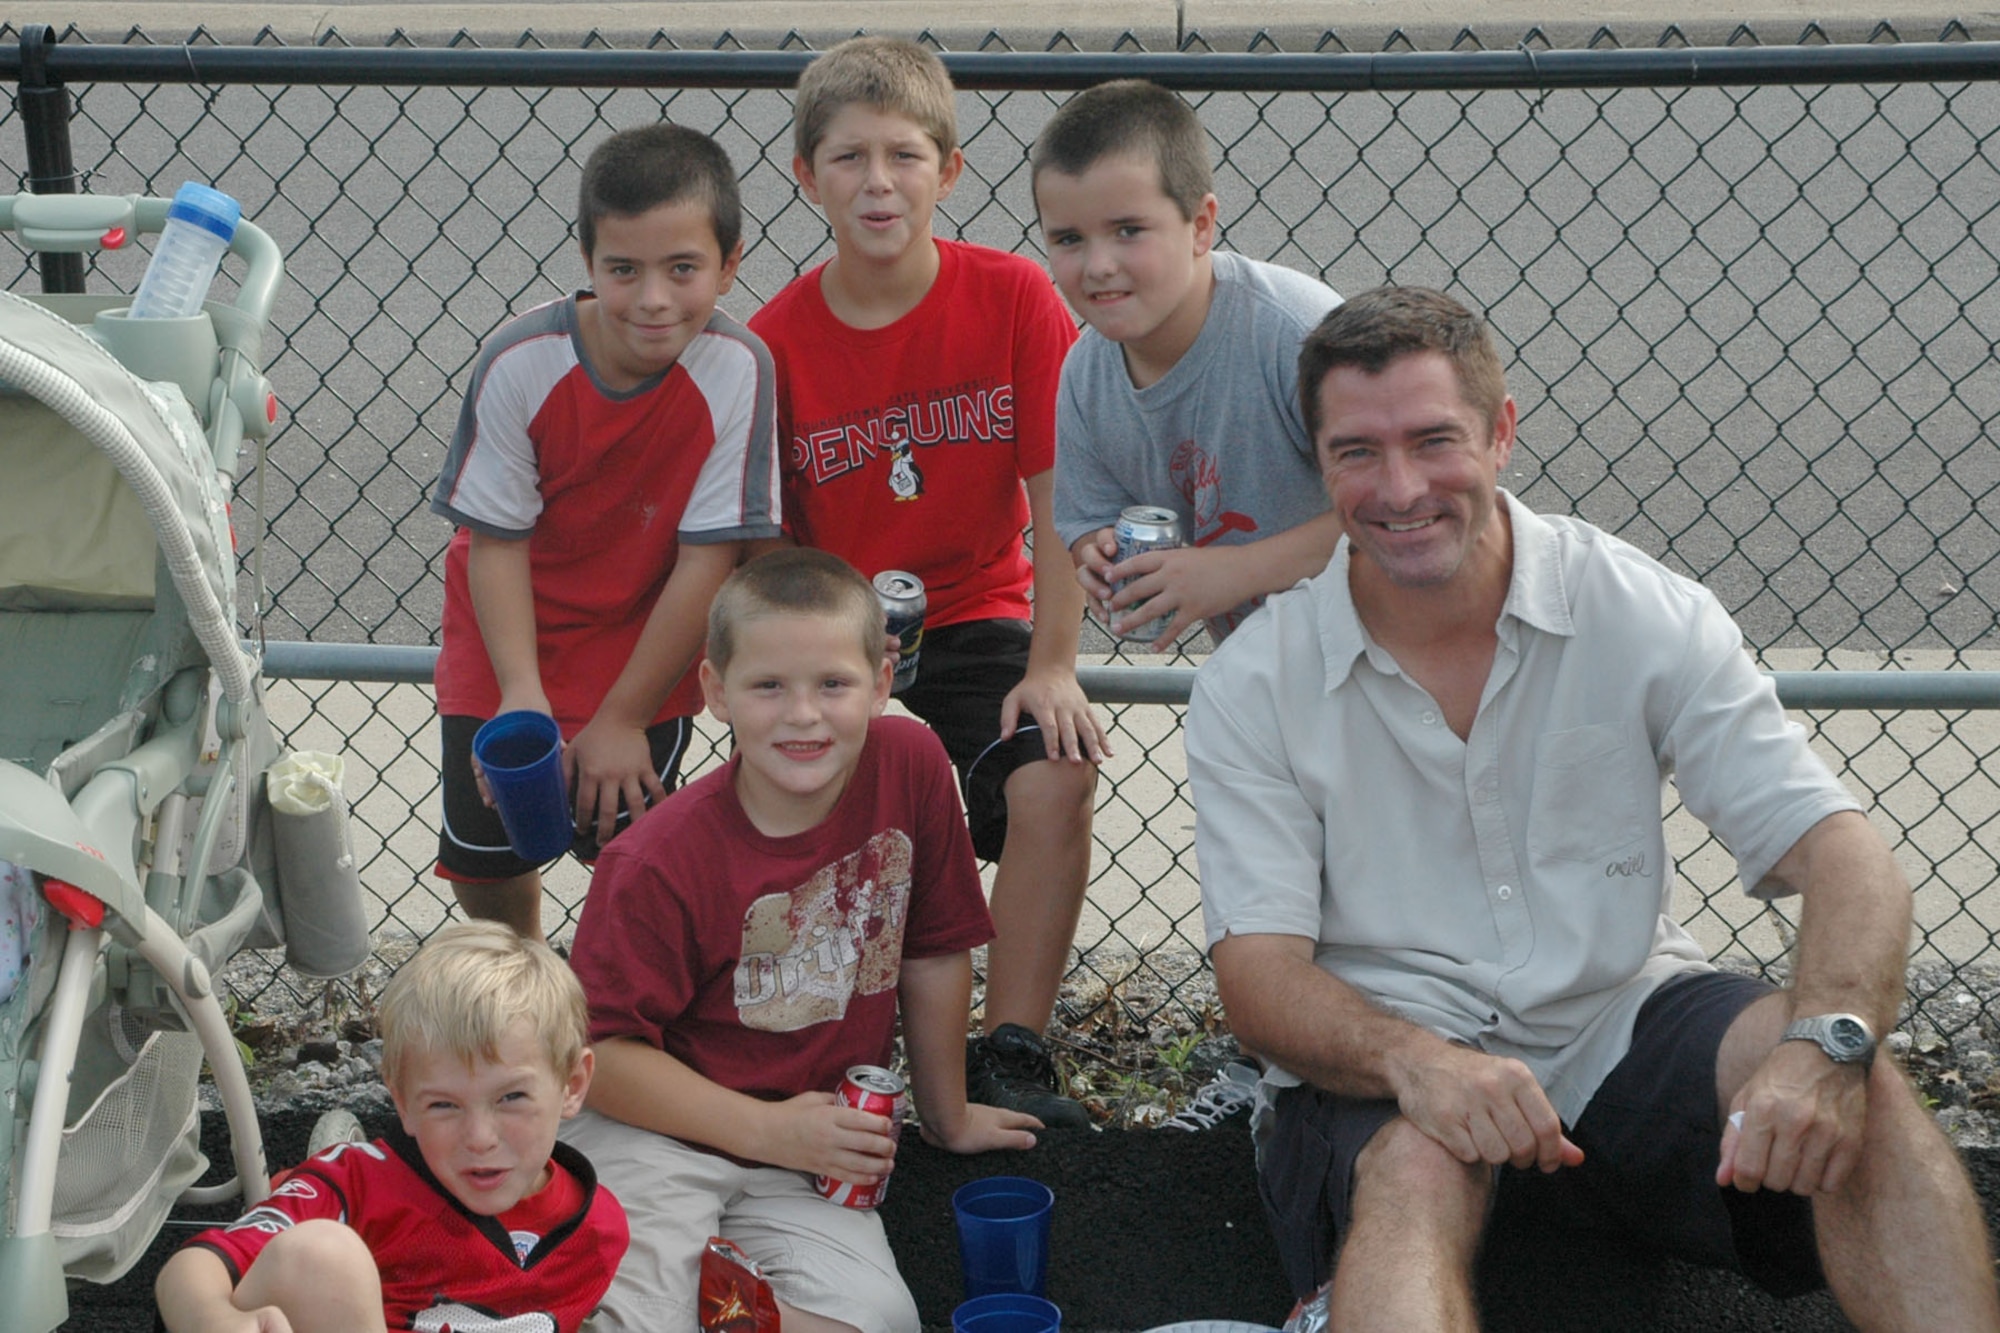 YOUNGSTOWN STATE UNIVERSITY, Ohio — Air Force Reserve Lt. Col. Bill Whittenberger, Operations Officer of the 757th Airlift Squadron  (right), along with a group of young Youngstown State University Penguins football fans, Jacob Whittenberger (front), Richie Hofus, (seated), Luke Whittenberger, Kyle Kovach and Matthew Whittenberger (standing from left), enjoy themselves as 370 Airmen, family members and friends from the 910th, based at Youngstown Air Reserve Station, attended a pre-game tailgate lot celebration and the home opener of YSU's 2007 football season in recognition of the U.S. Air Force's 60th birthday. U.S. Air Force photo/ Tech. Sgt. Bob Barko Jr. 